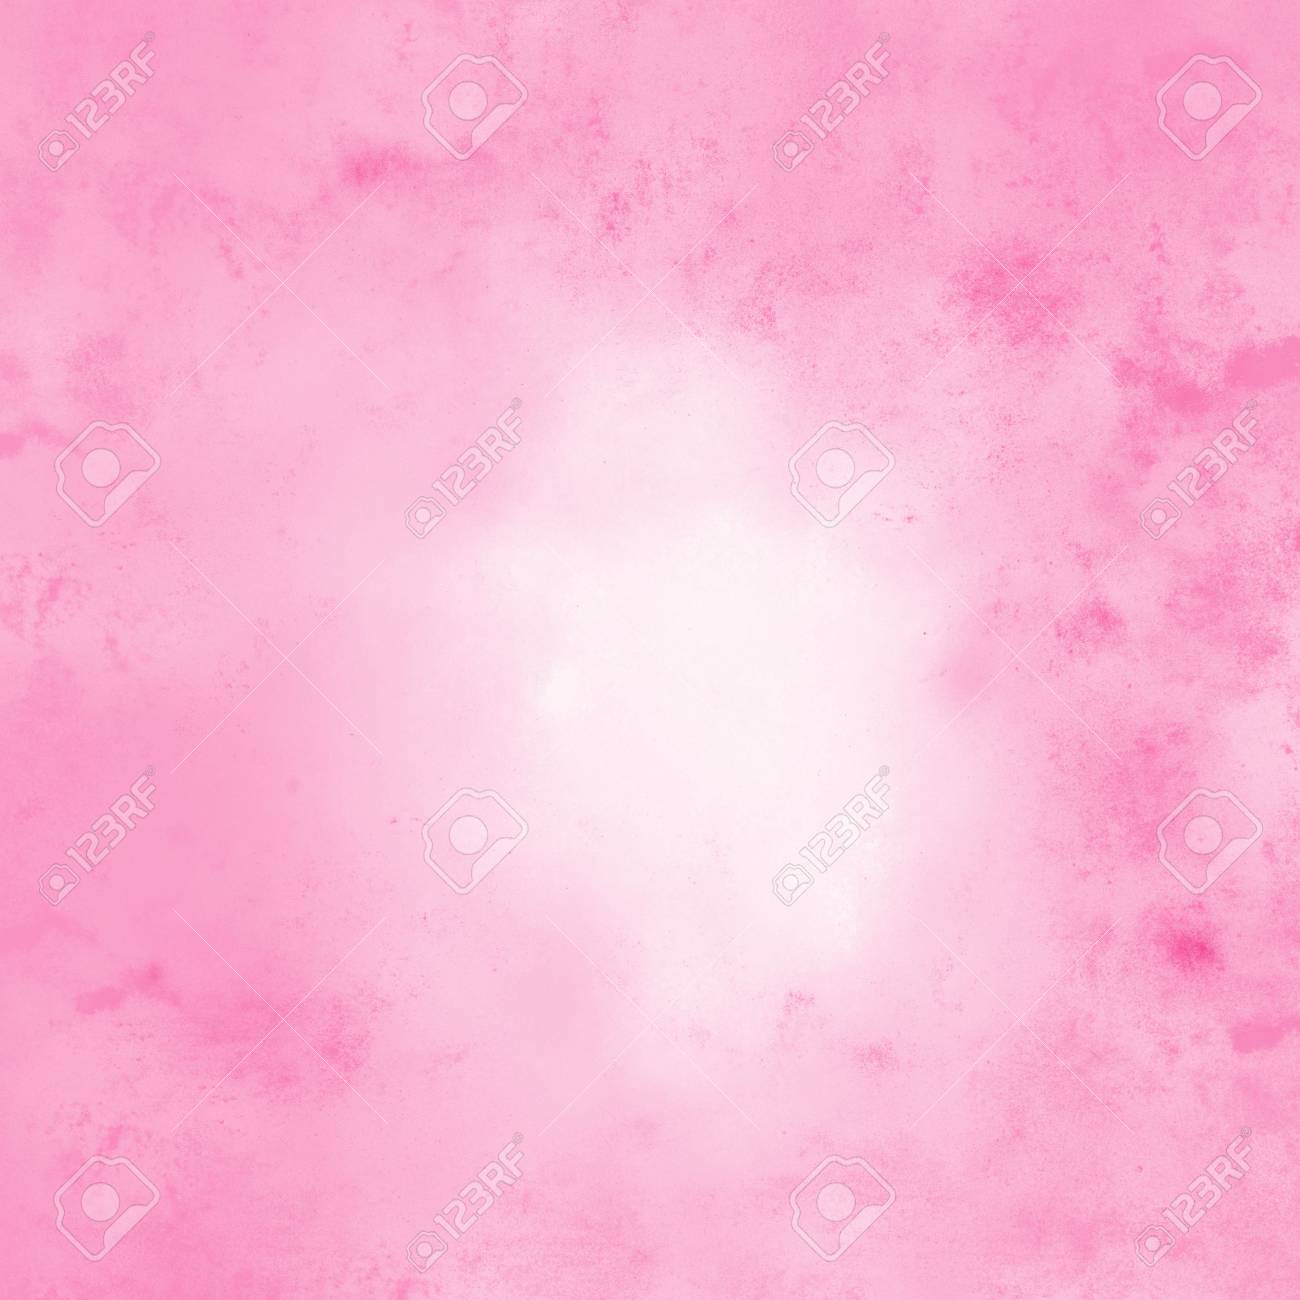 Grunge Background In Pink And White Color Abstract